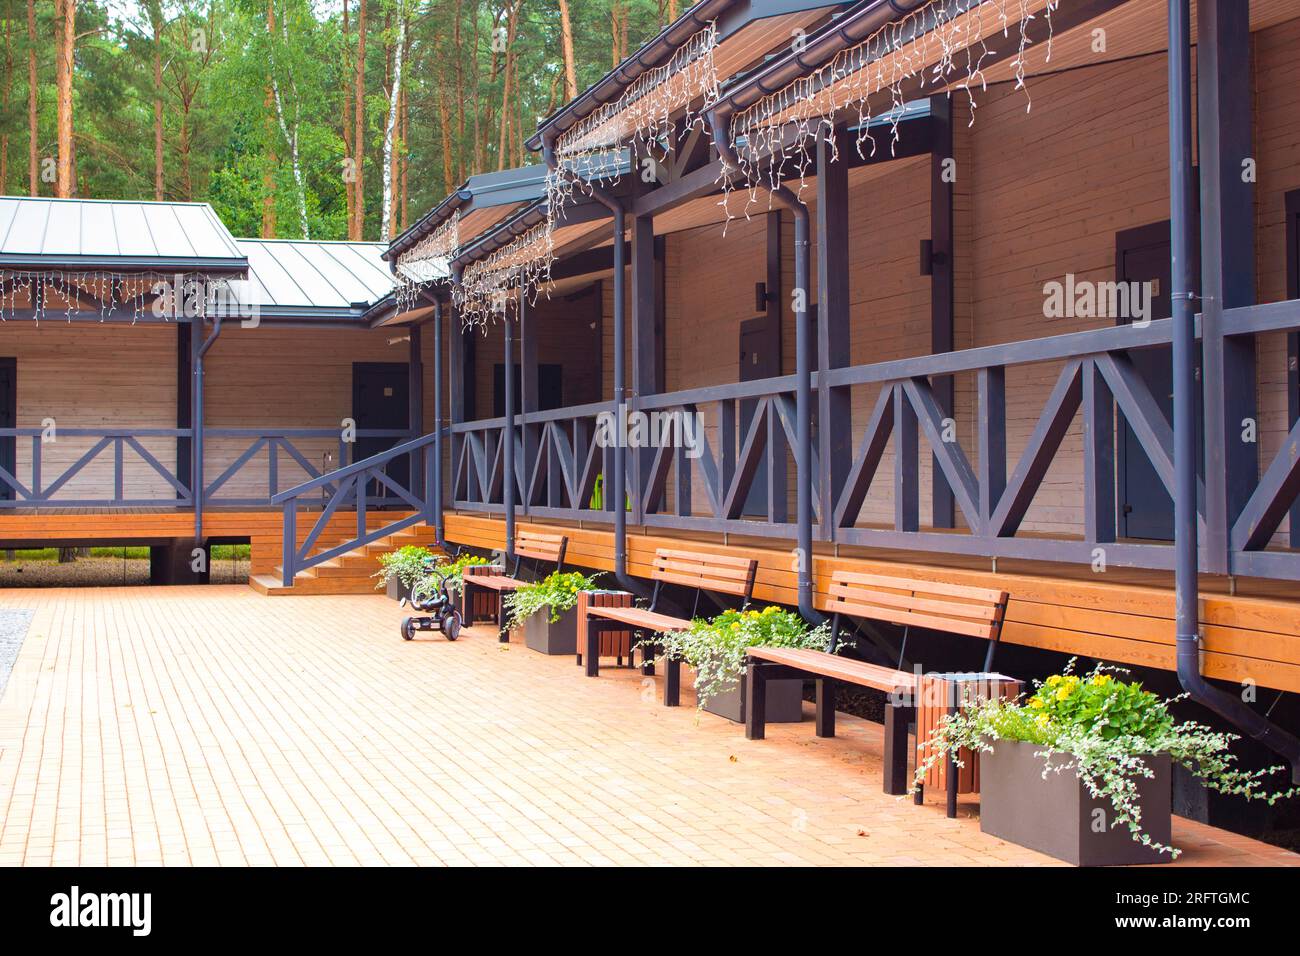 View of the hotel courtyard with outdoor terrace and benches. The wooden building of the hotel harmonizes with nature. Relaxation in nature. Stock Photo